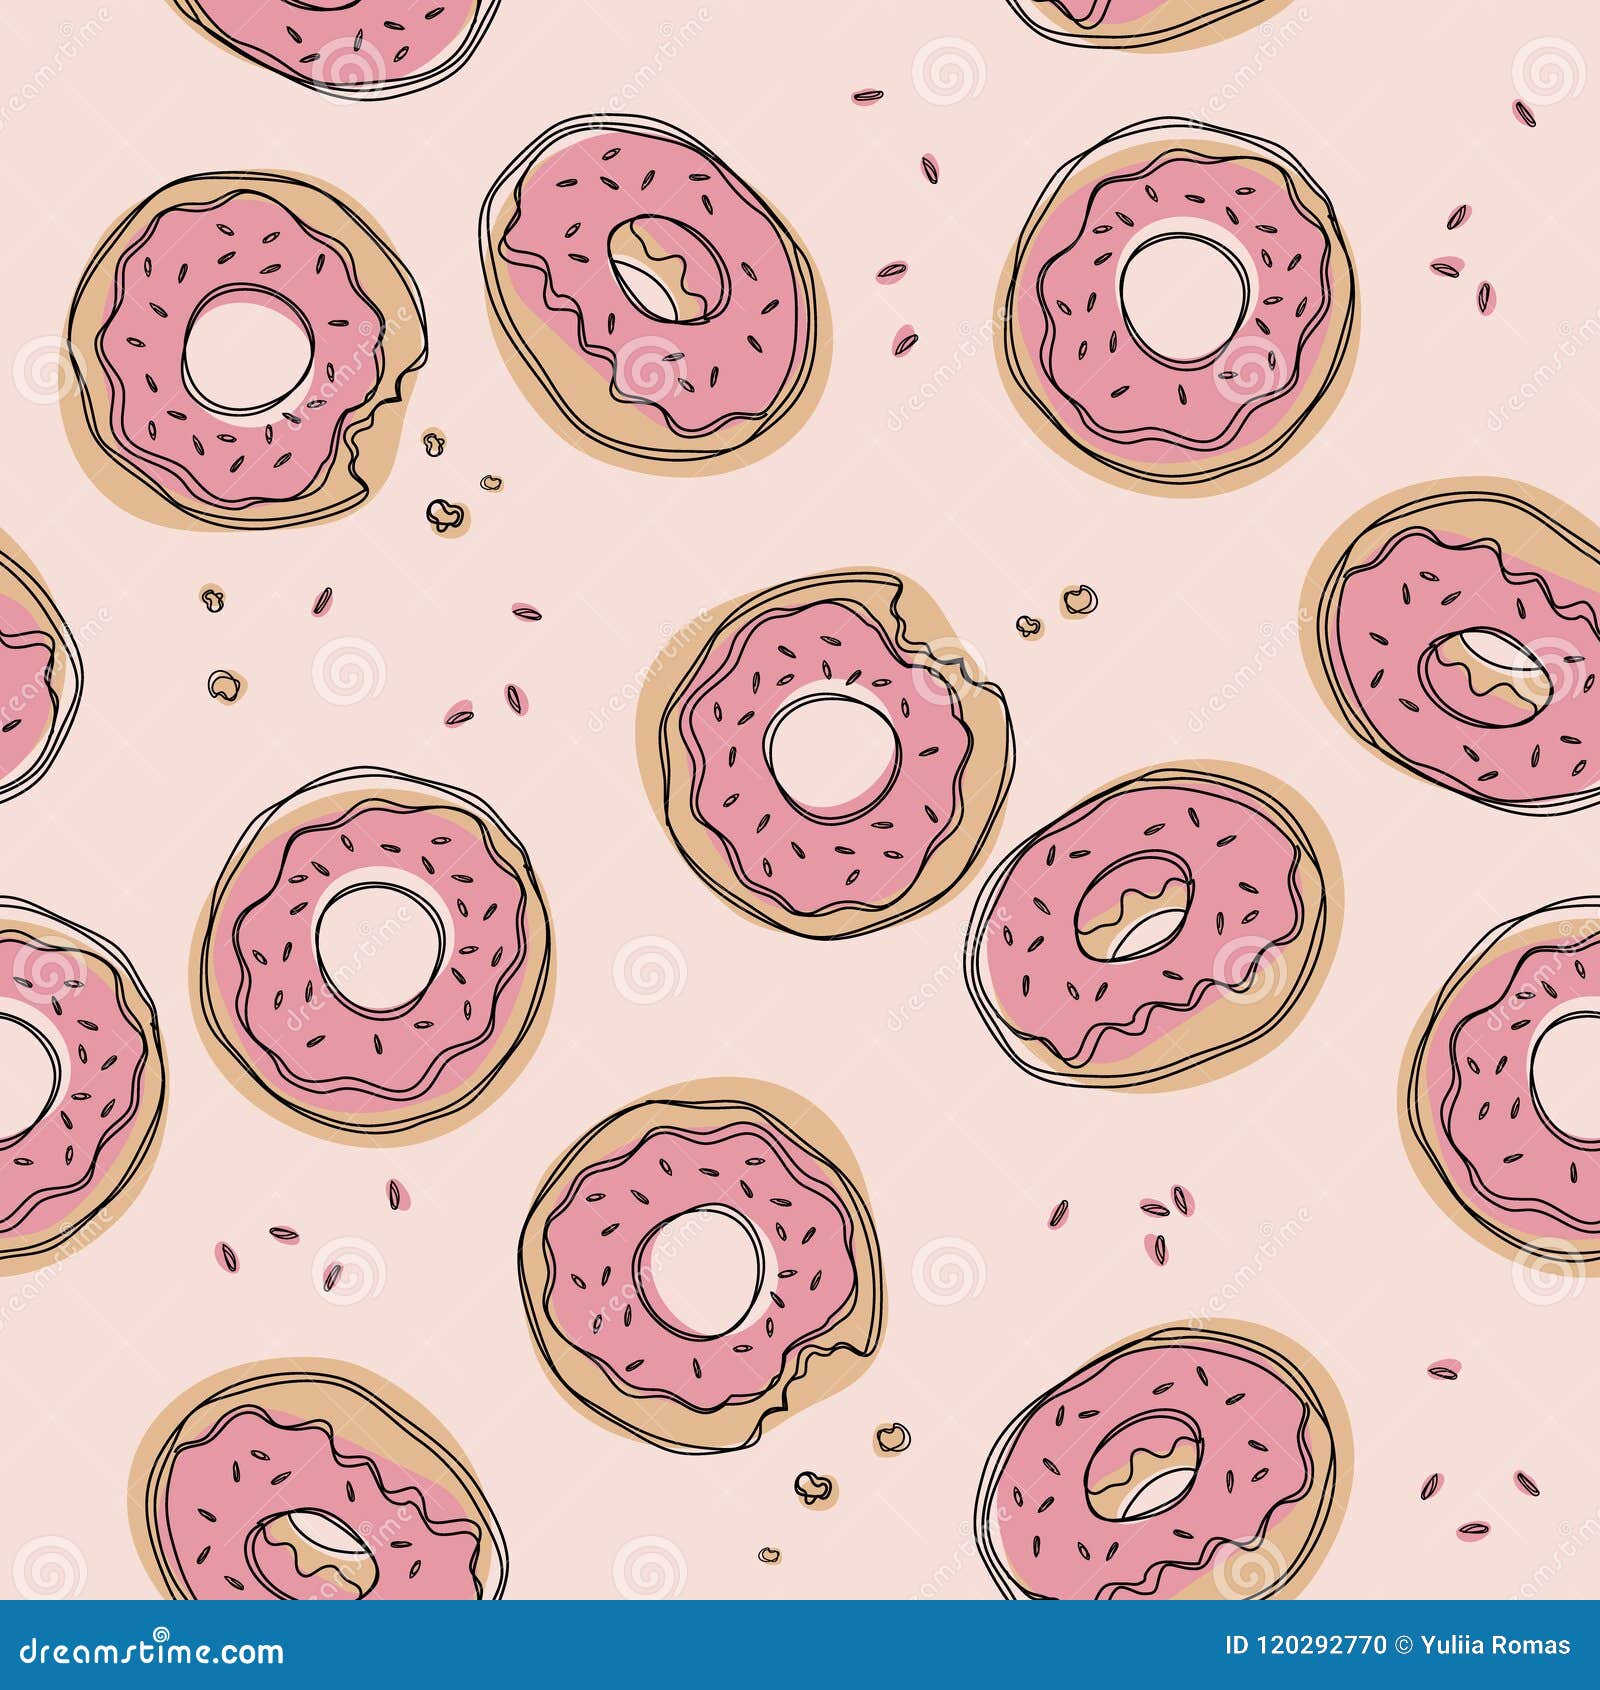 Donuts Seamless Pattern. Cute Sweet Food Baby Background. Colorful Design  for Textile, Wallpaper, Fabric, Decor. Stock Illustration - Illustration of  colorful, donuts: 120292770